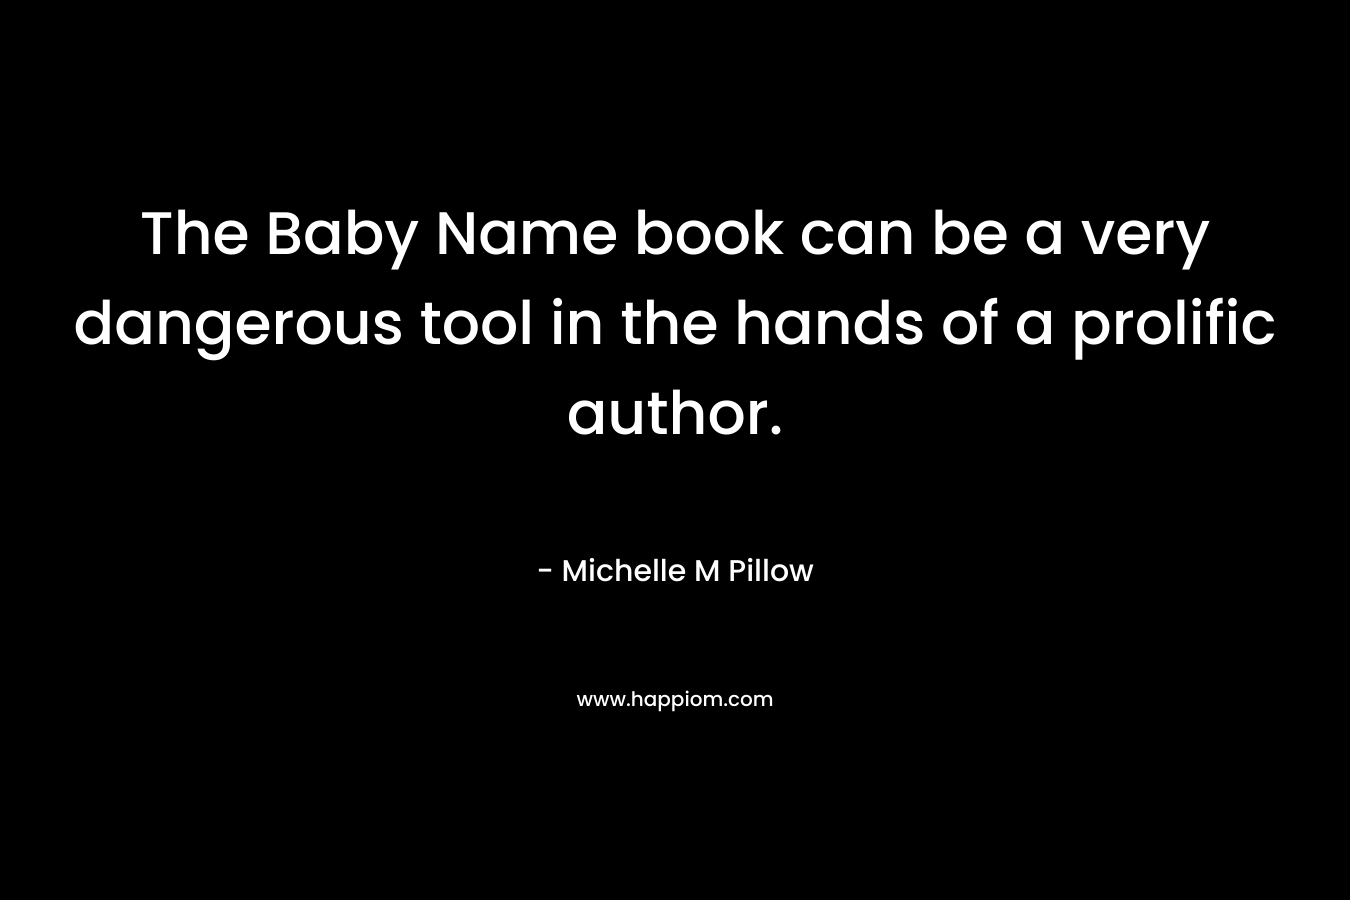 The Baby Name book can be a very dangerous tool in the hands of a prolific author. – Michelle M Pillow